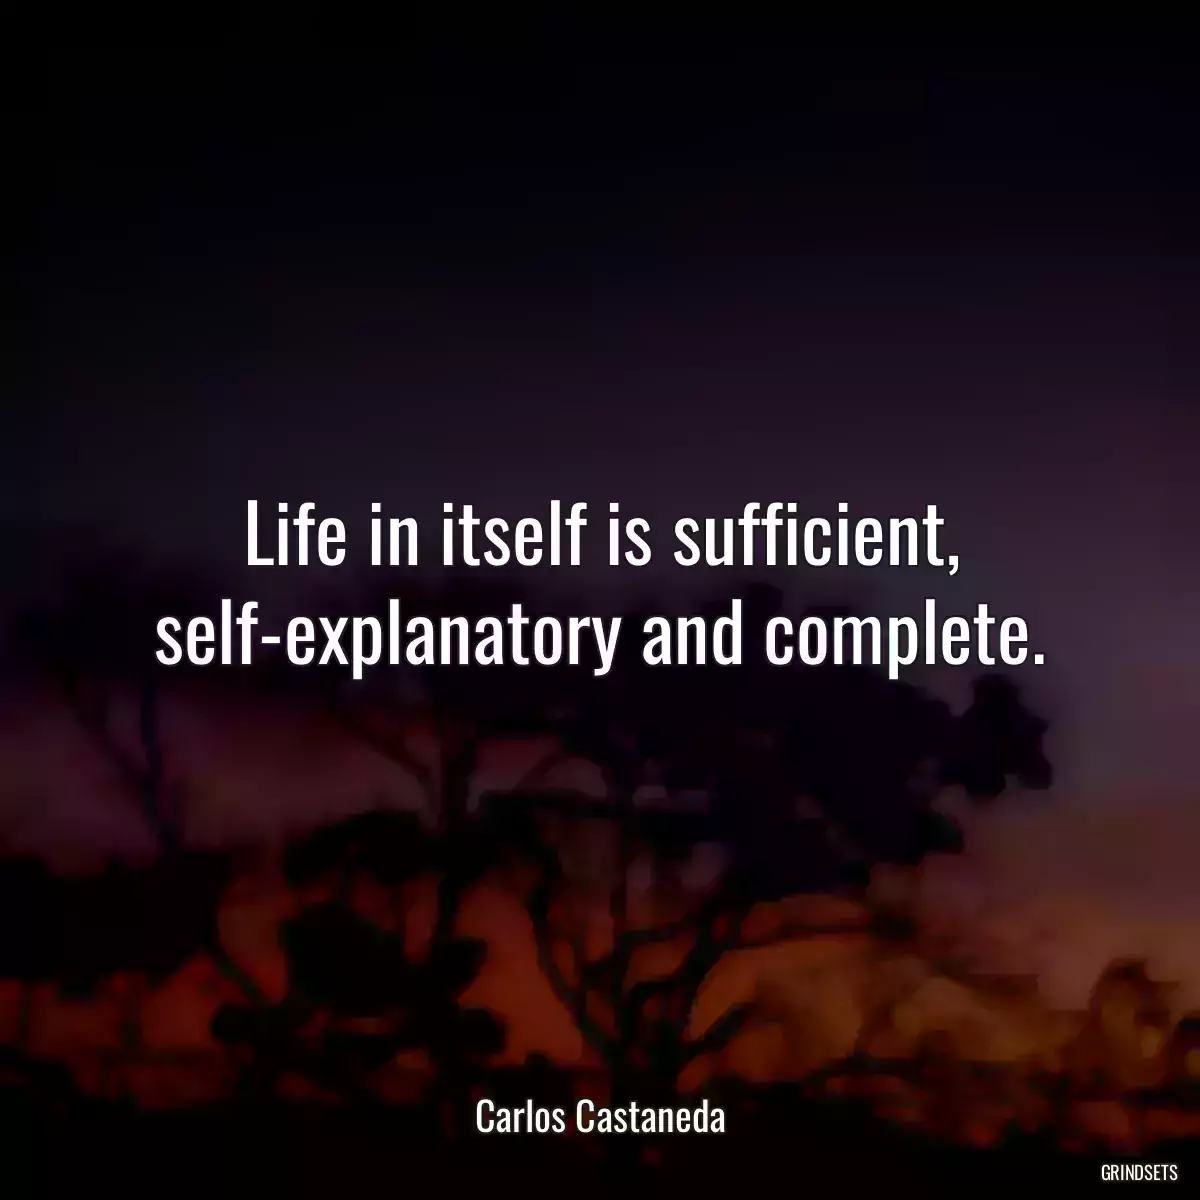 Life in itself is sufficient, self-explanatory and complete.